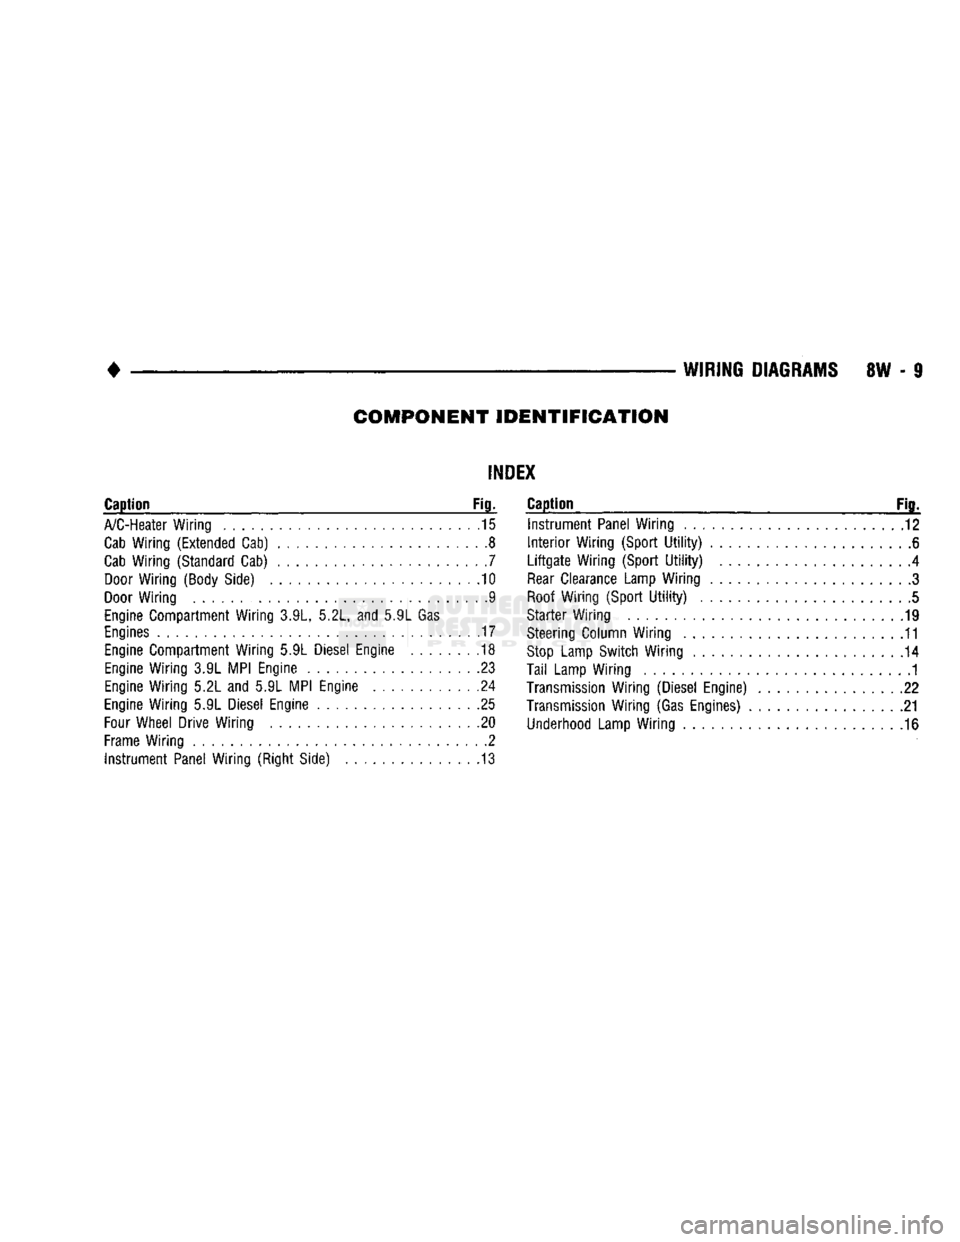 DODGE TRUCK 1993  Service Repair Manual 
COMPONENT
 IDENTIFICATION 

INDEX 

Caption
 Fig. 

A/C-Heater
 Wiring
 15 
 Cab
 Wiring (Extended
 Cab)
 8 

Cab
 Wiring (Standard Cab)
 7 

Door
 Wiring (Body
 Side)
 10 

Door
 Wiring
 9 

Engine
